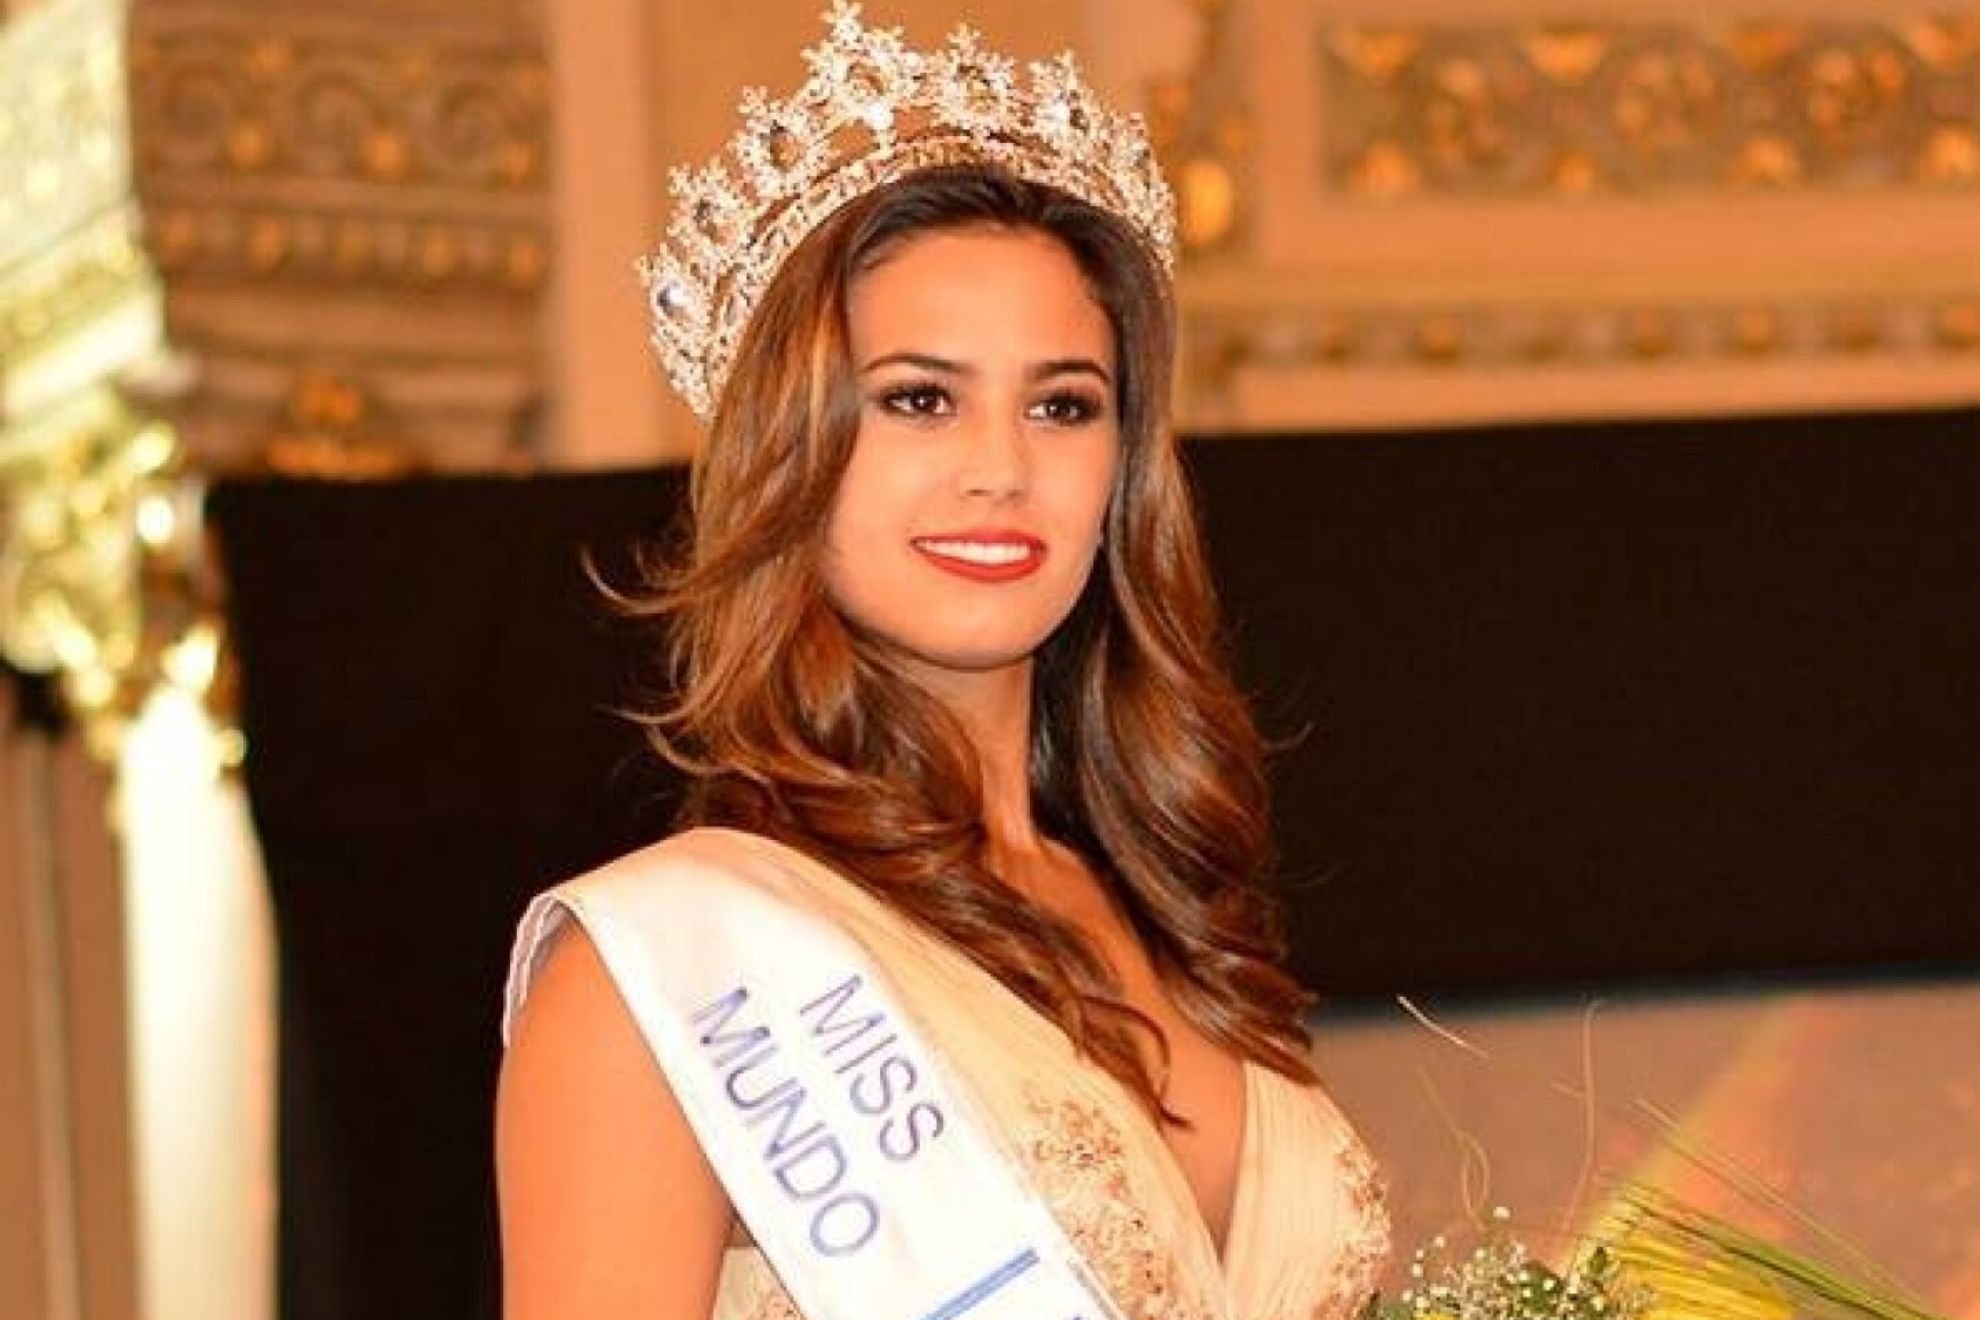 Sherika De Armas, a former Miss World contender who represented Uruguay in the 2015 edition of the beauty pageant, died on October 13th at the age of 26.